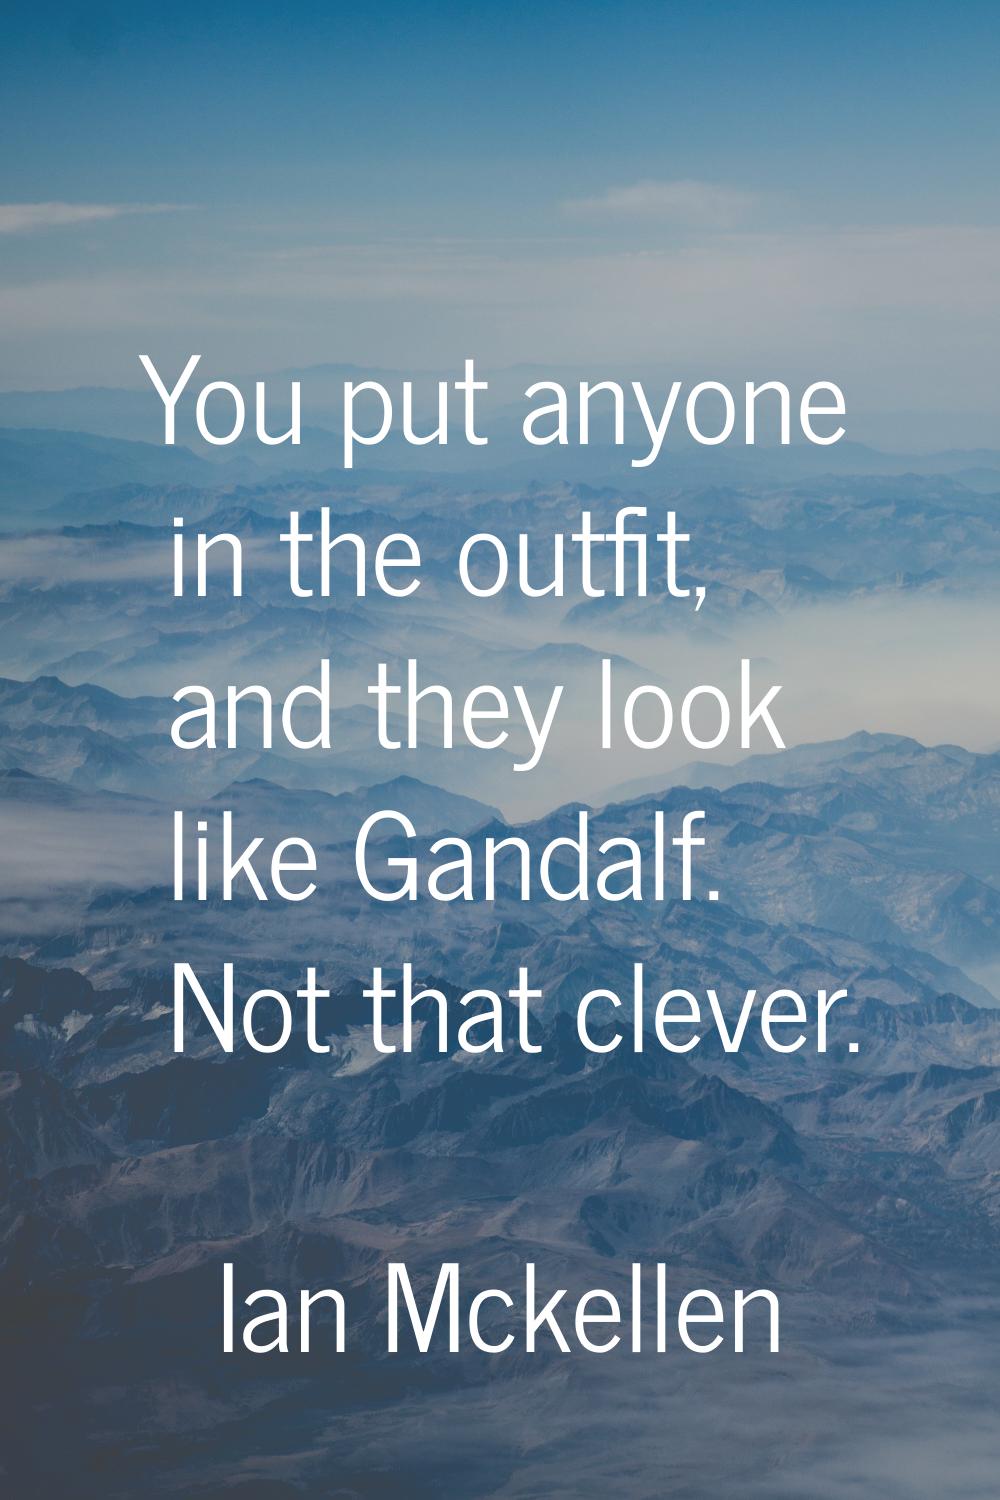 You put anyone in the outfit, and they look like Gandalf. Not that clever.